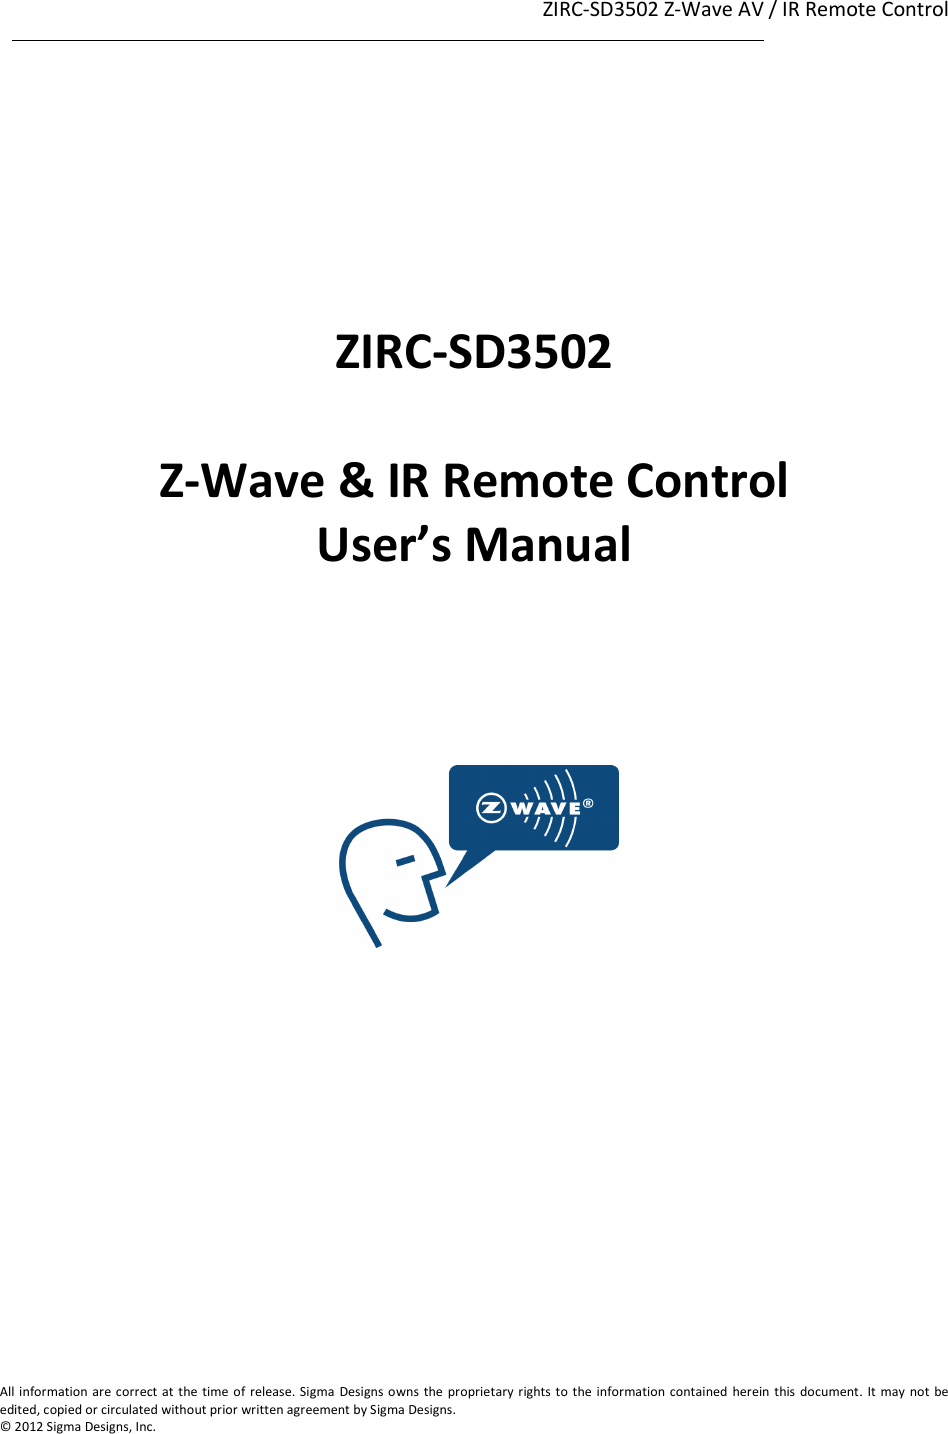 ZIRC-SD3502 Z-Wave AV / IR Remote Control  1                                                                                                                                                                                                             1             All information are correct at the time of release. Sigma  Designs owns  the proprietary rights to the information contained herein this document. It  may not  be edited, copied or circulated without prior written agreement by Sigma Designs.   © 2012 Sigma Designs, Inc.       ZIRC-SD3502  Z-Wave &amp; IR Remote Control User’s Manual        